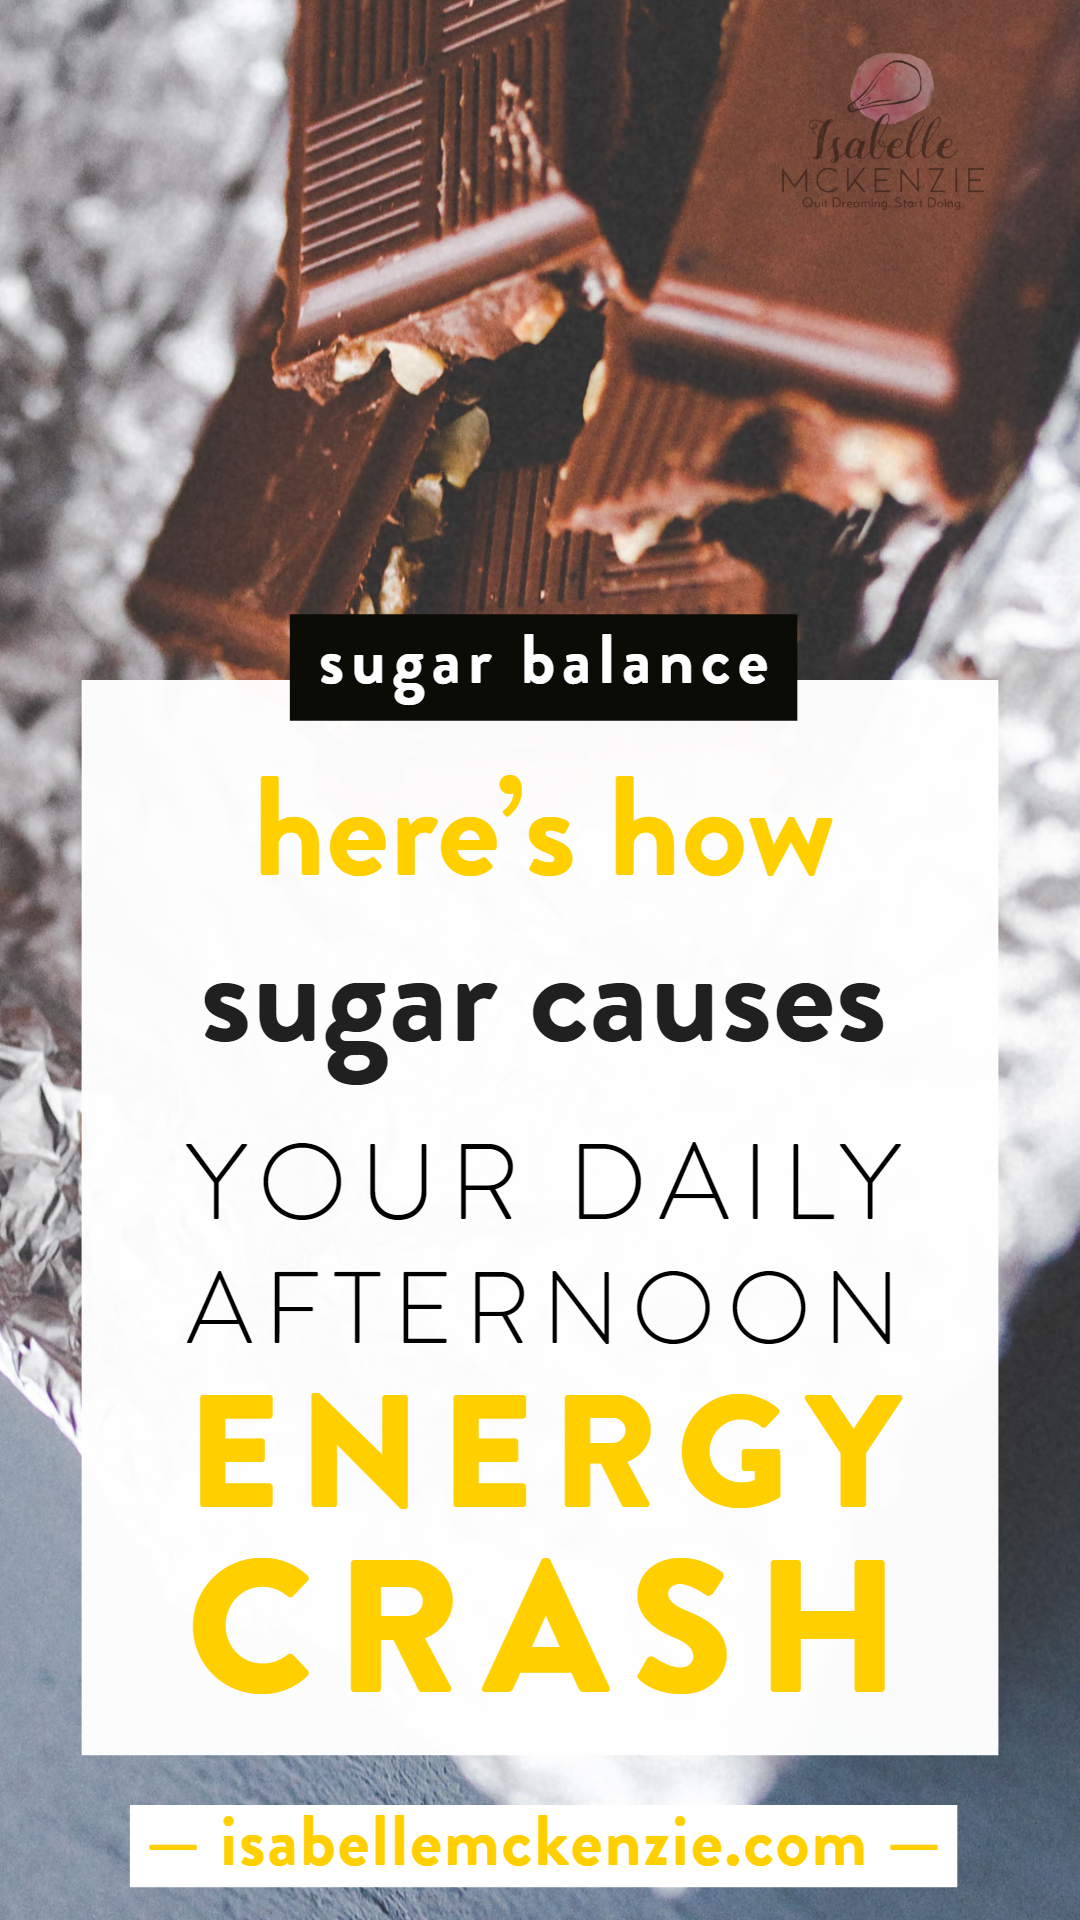 Here's How Sugar Causes Your Daily Afternoon Energy Crash - Isabelle McKenzie